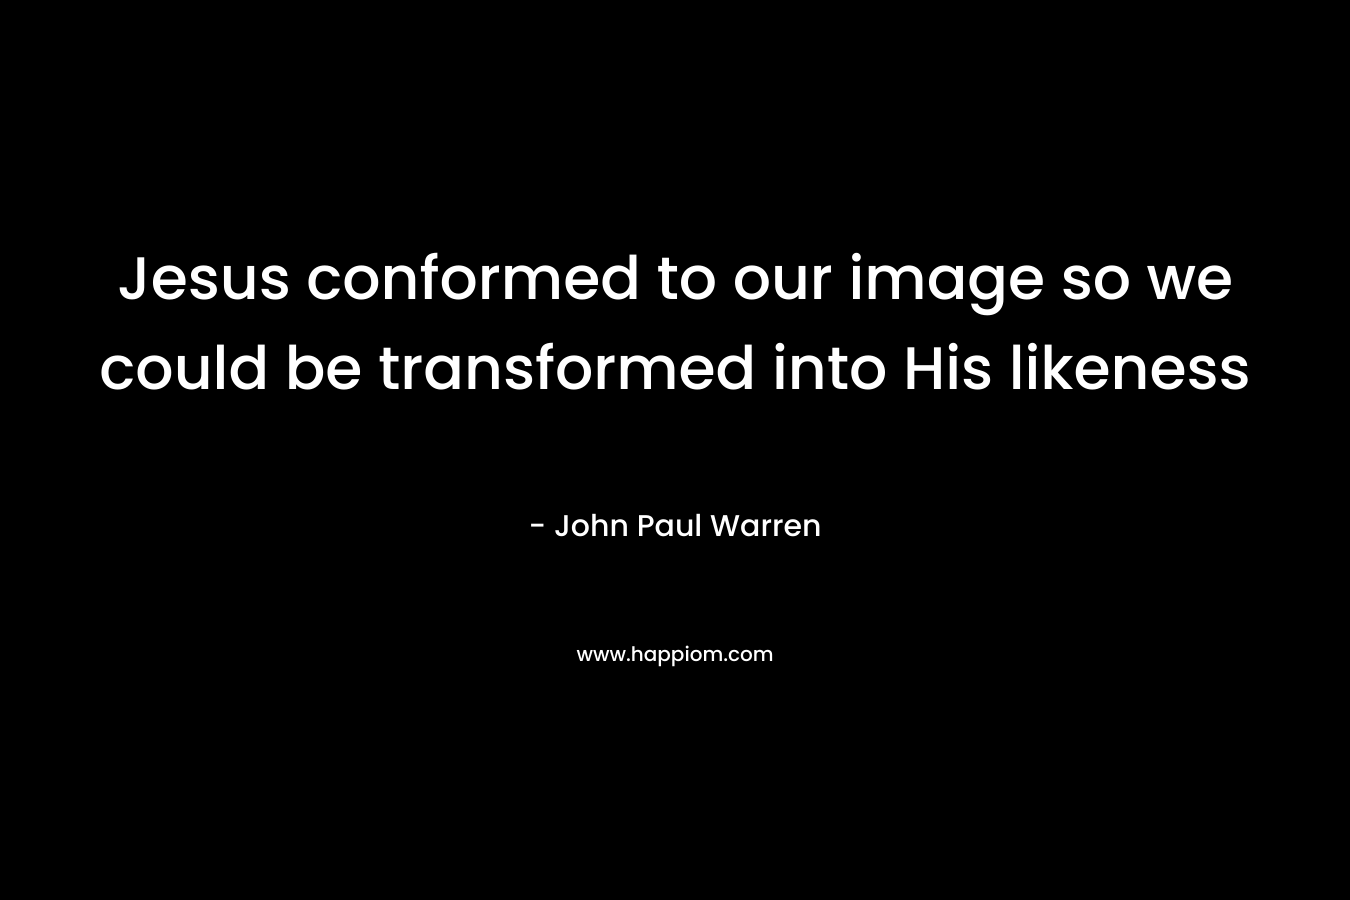 Jesus conformed to our image so we could be transformed into His likeness